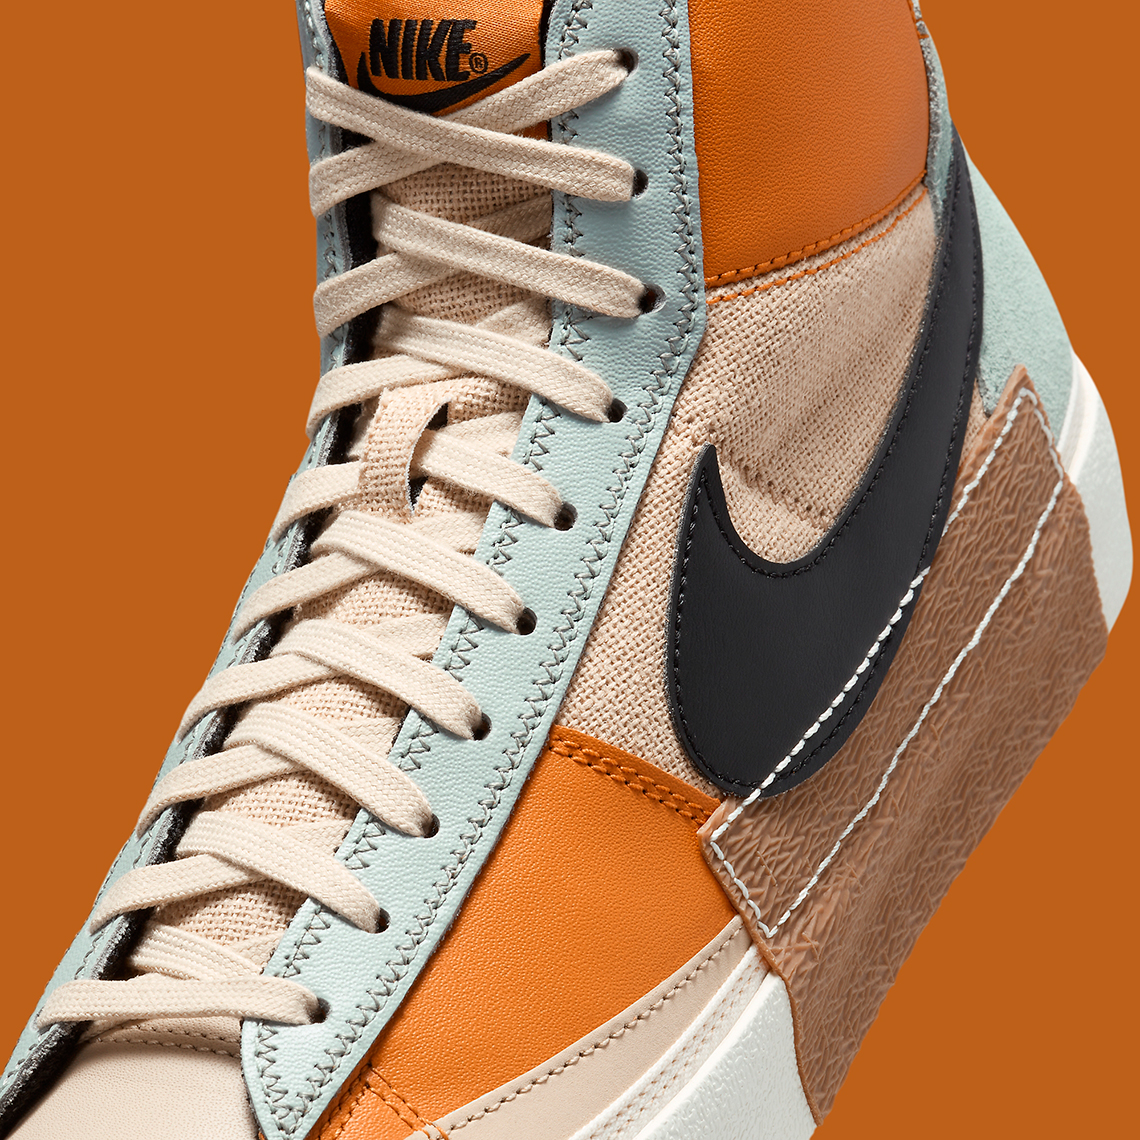 The Nike Blazer Mid Pro Club Lands In Fall Colors | Sneaker News